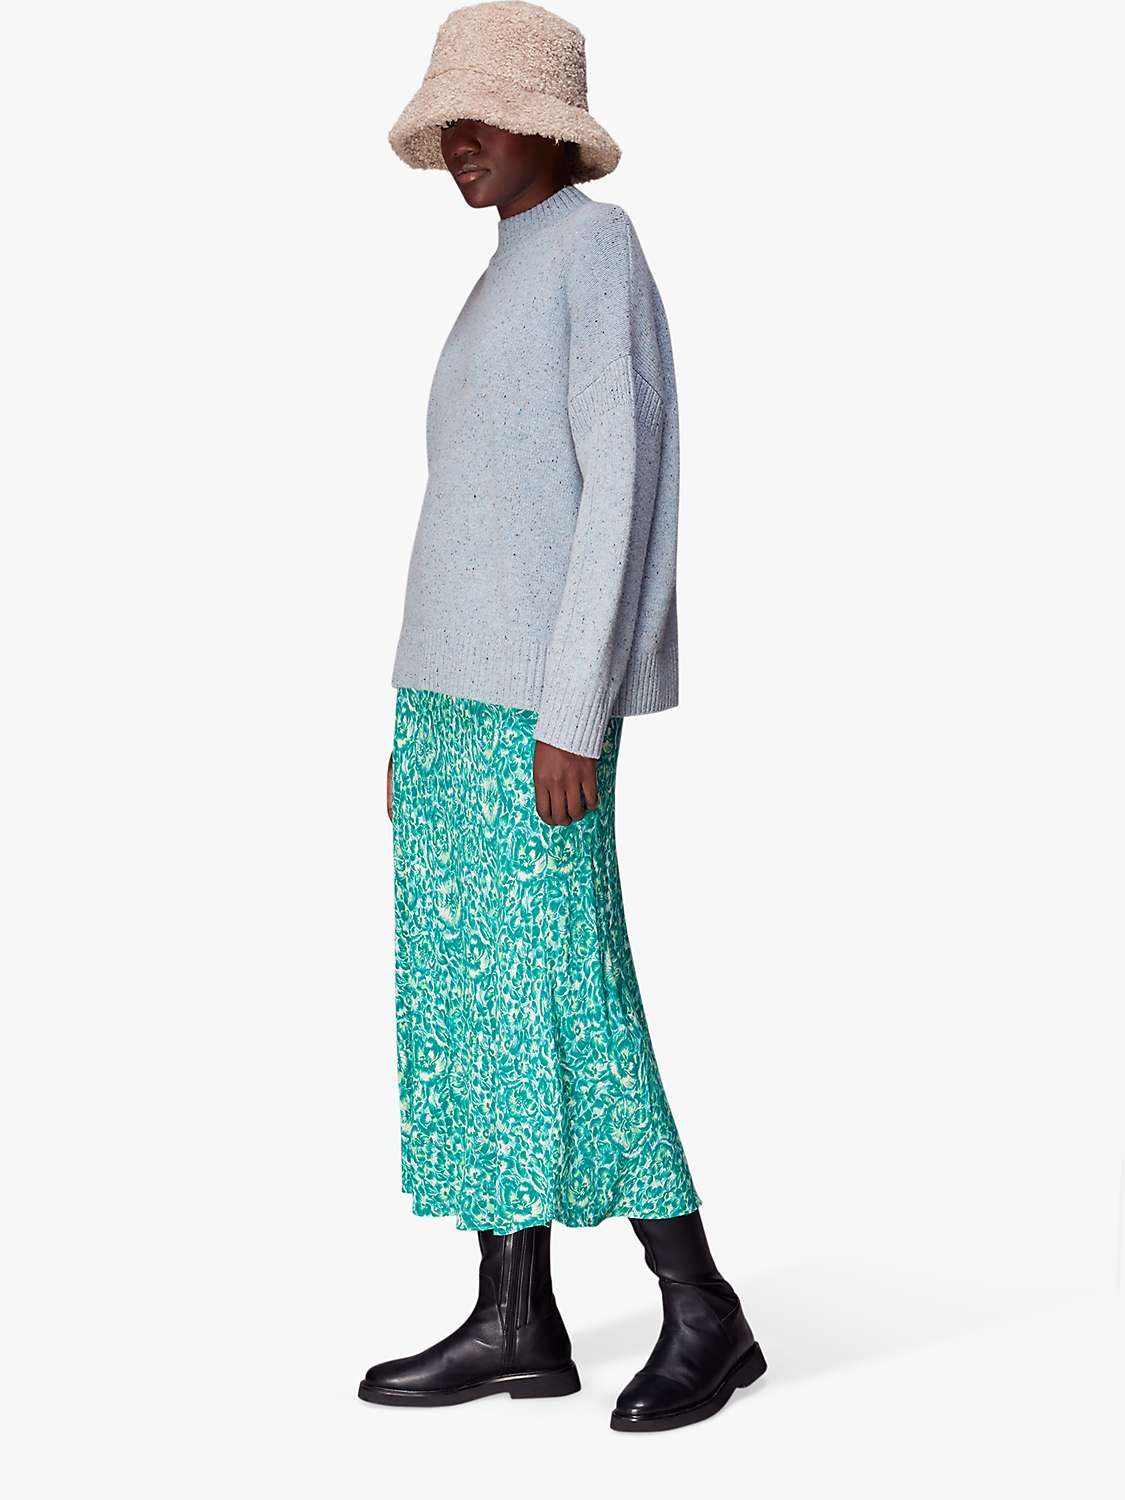 Buy Whistles Clouded Floral Midi Skirt, Green/Multi Online at johnlewis.com